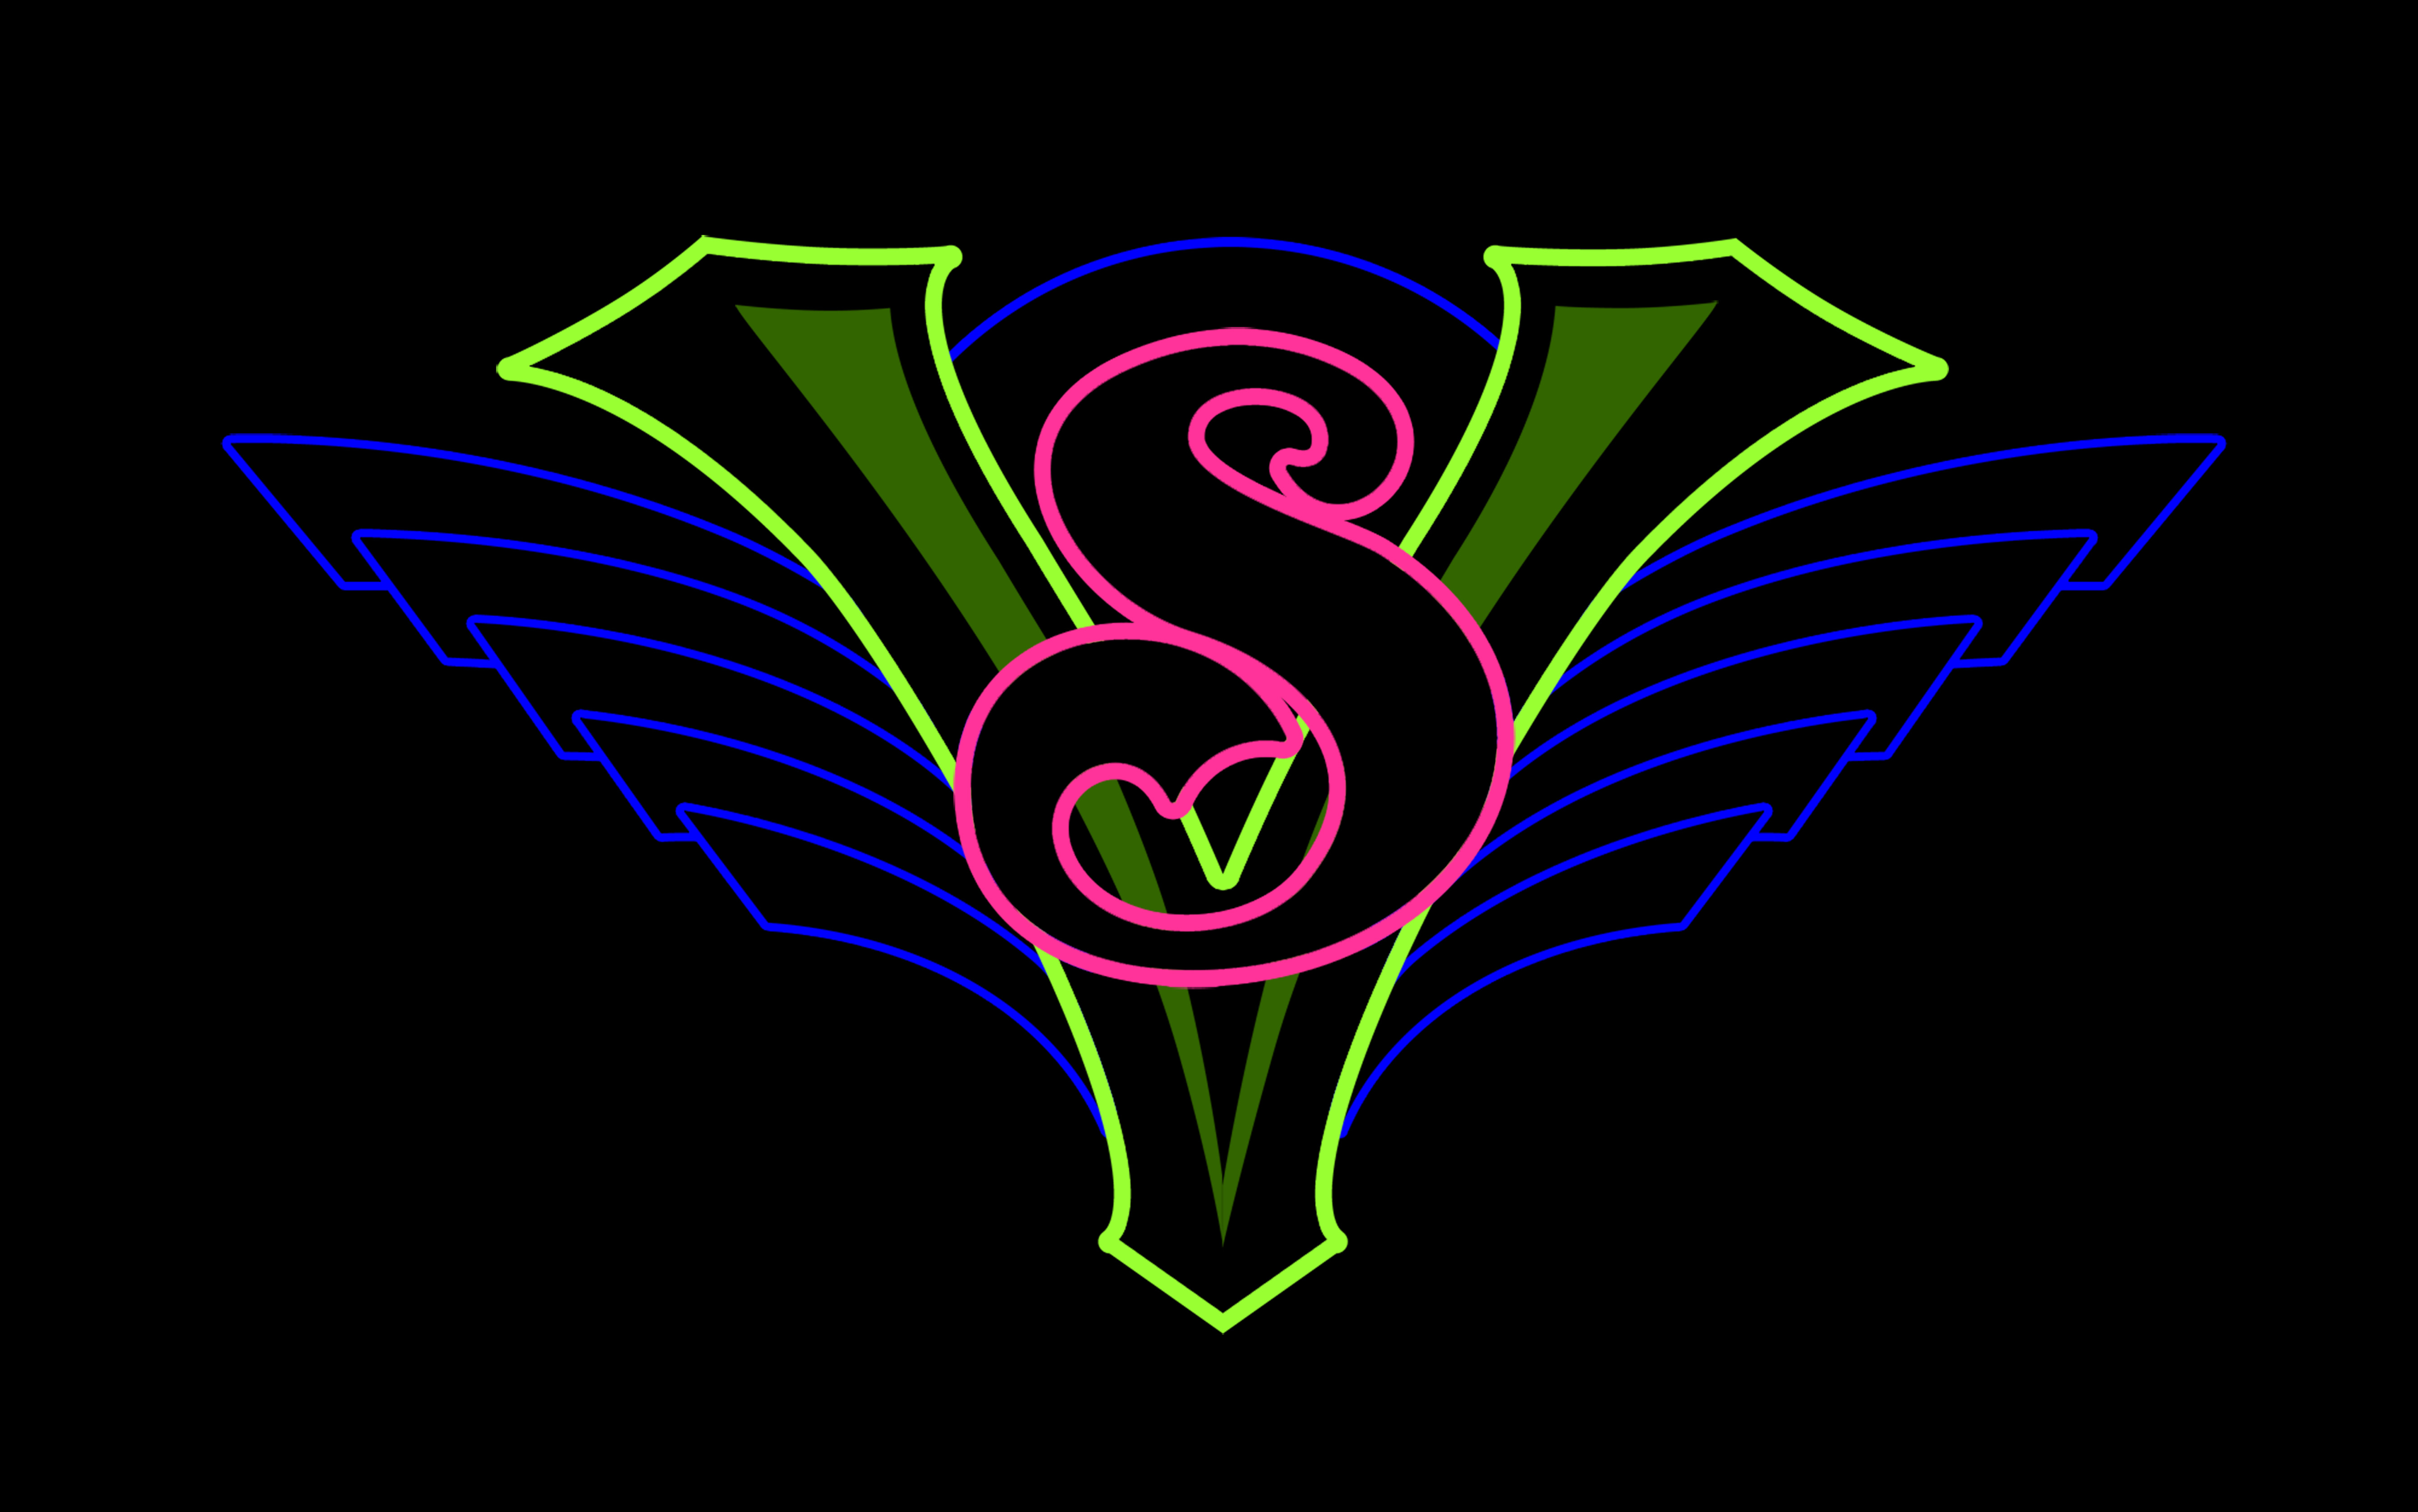 saucy jack and the space vixens logo